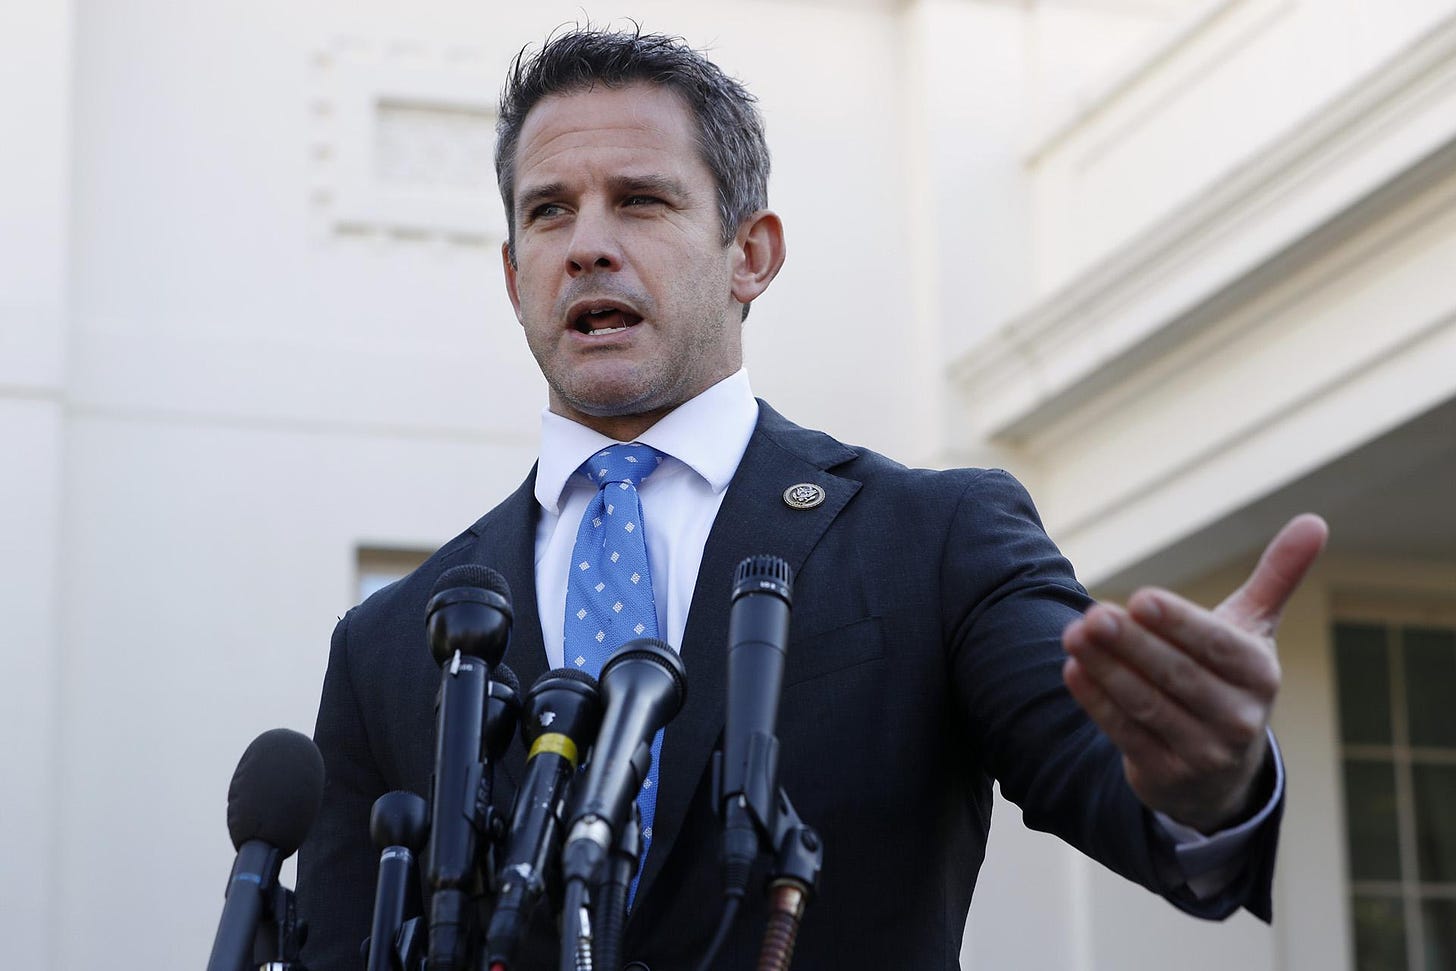 Rep. Kinzinger Meets with Trump After Deployment to Border | Chicago News |  WTTW